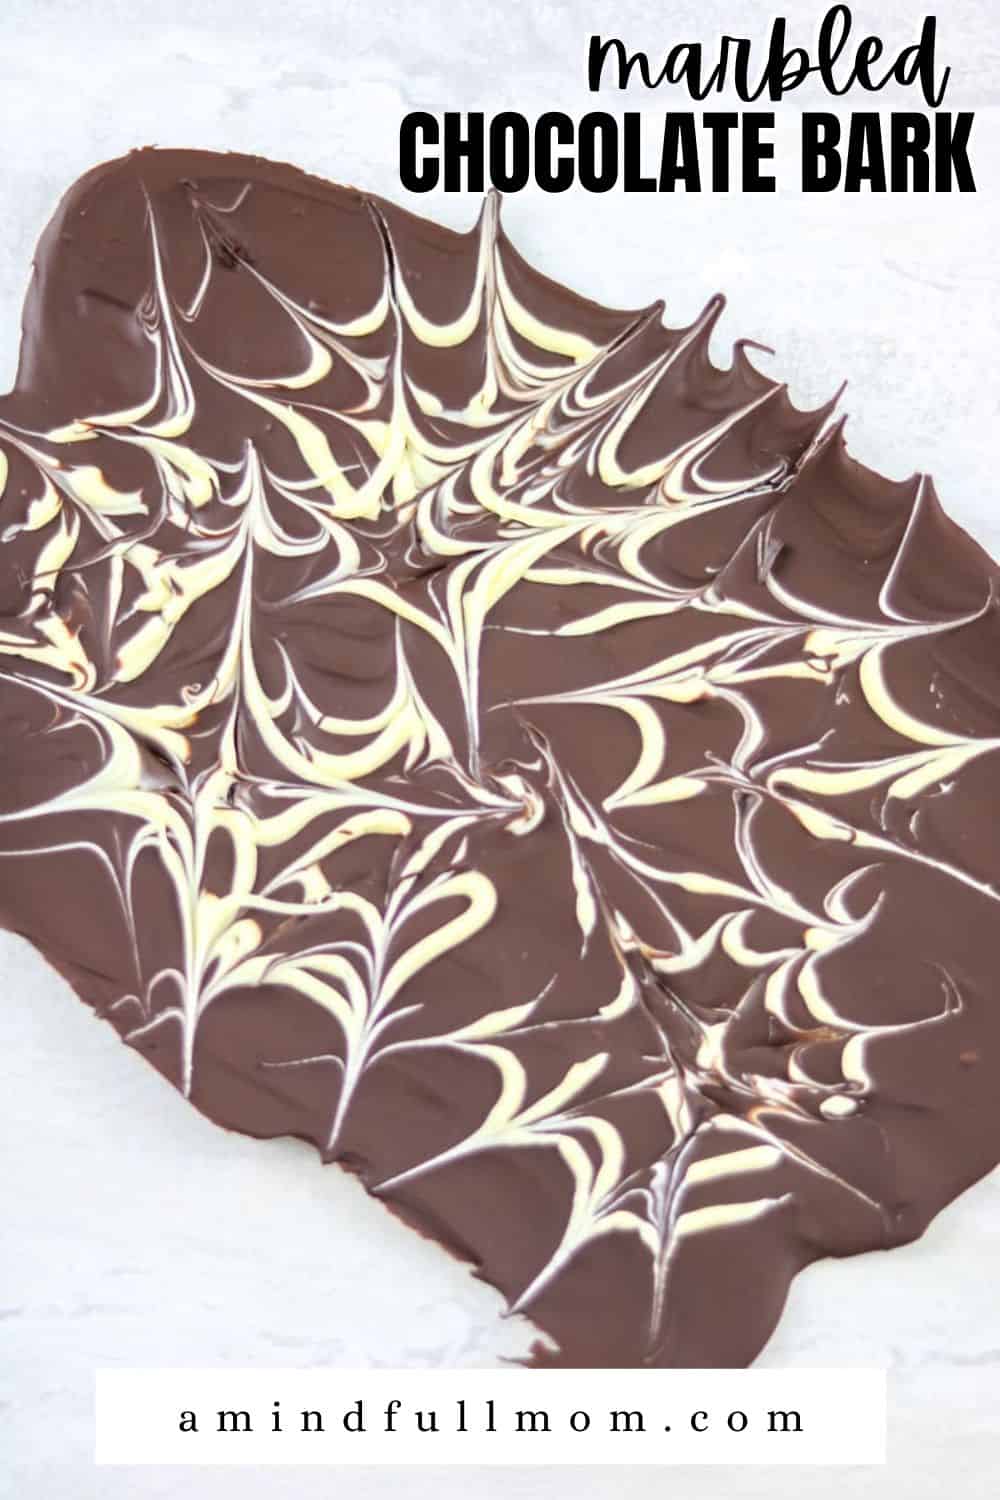 Make gourmet homemade chocolate bark using this simple recipe! It makes a delicious gift, or no-bake treat to enjoy yourself. Enjoy this simple marbled chocolate bark plain or follow given variations to make homemade chocolate bark the way you like!